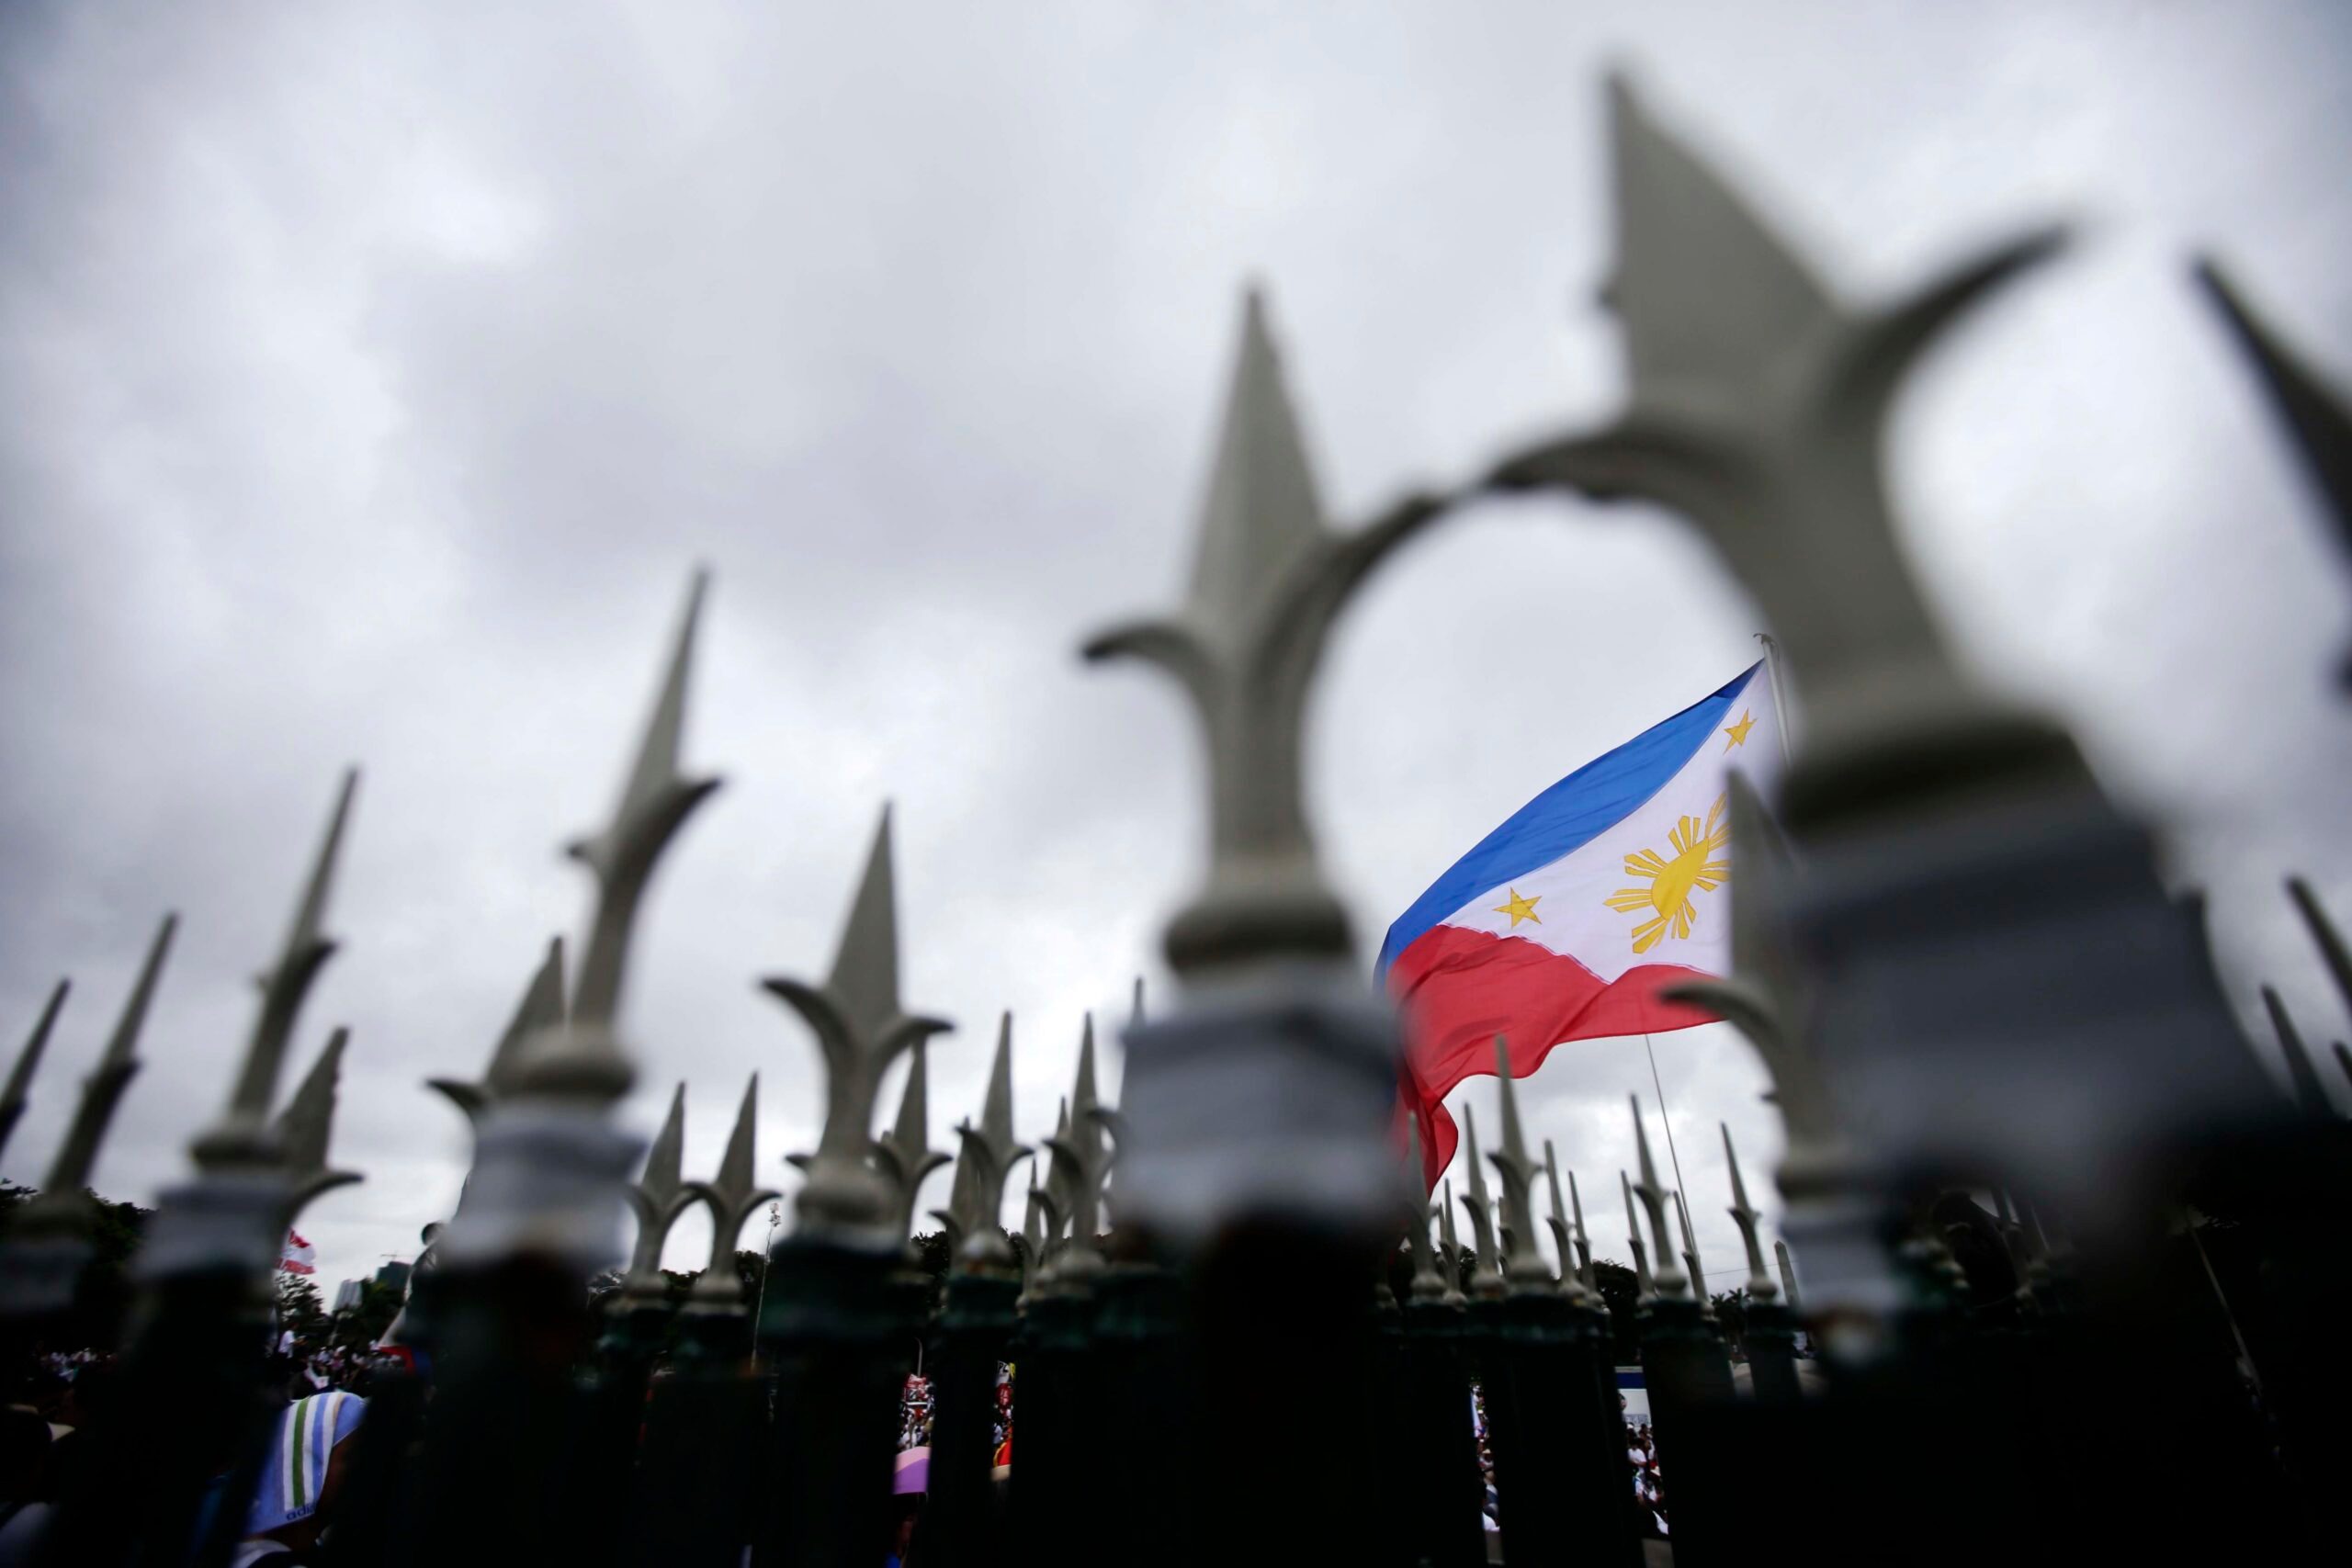 Should Filipino be scrapped from the college curriculum?